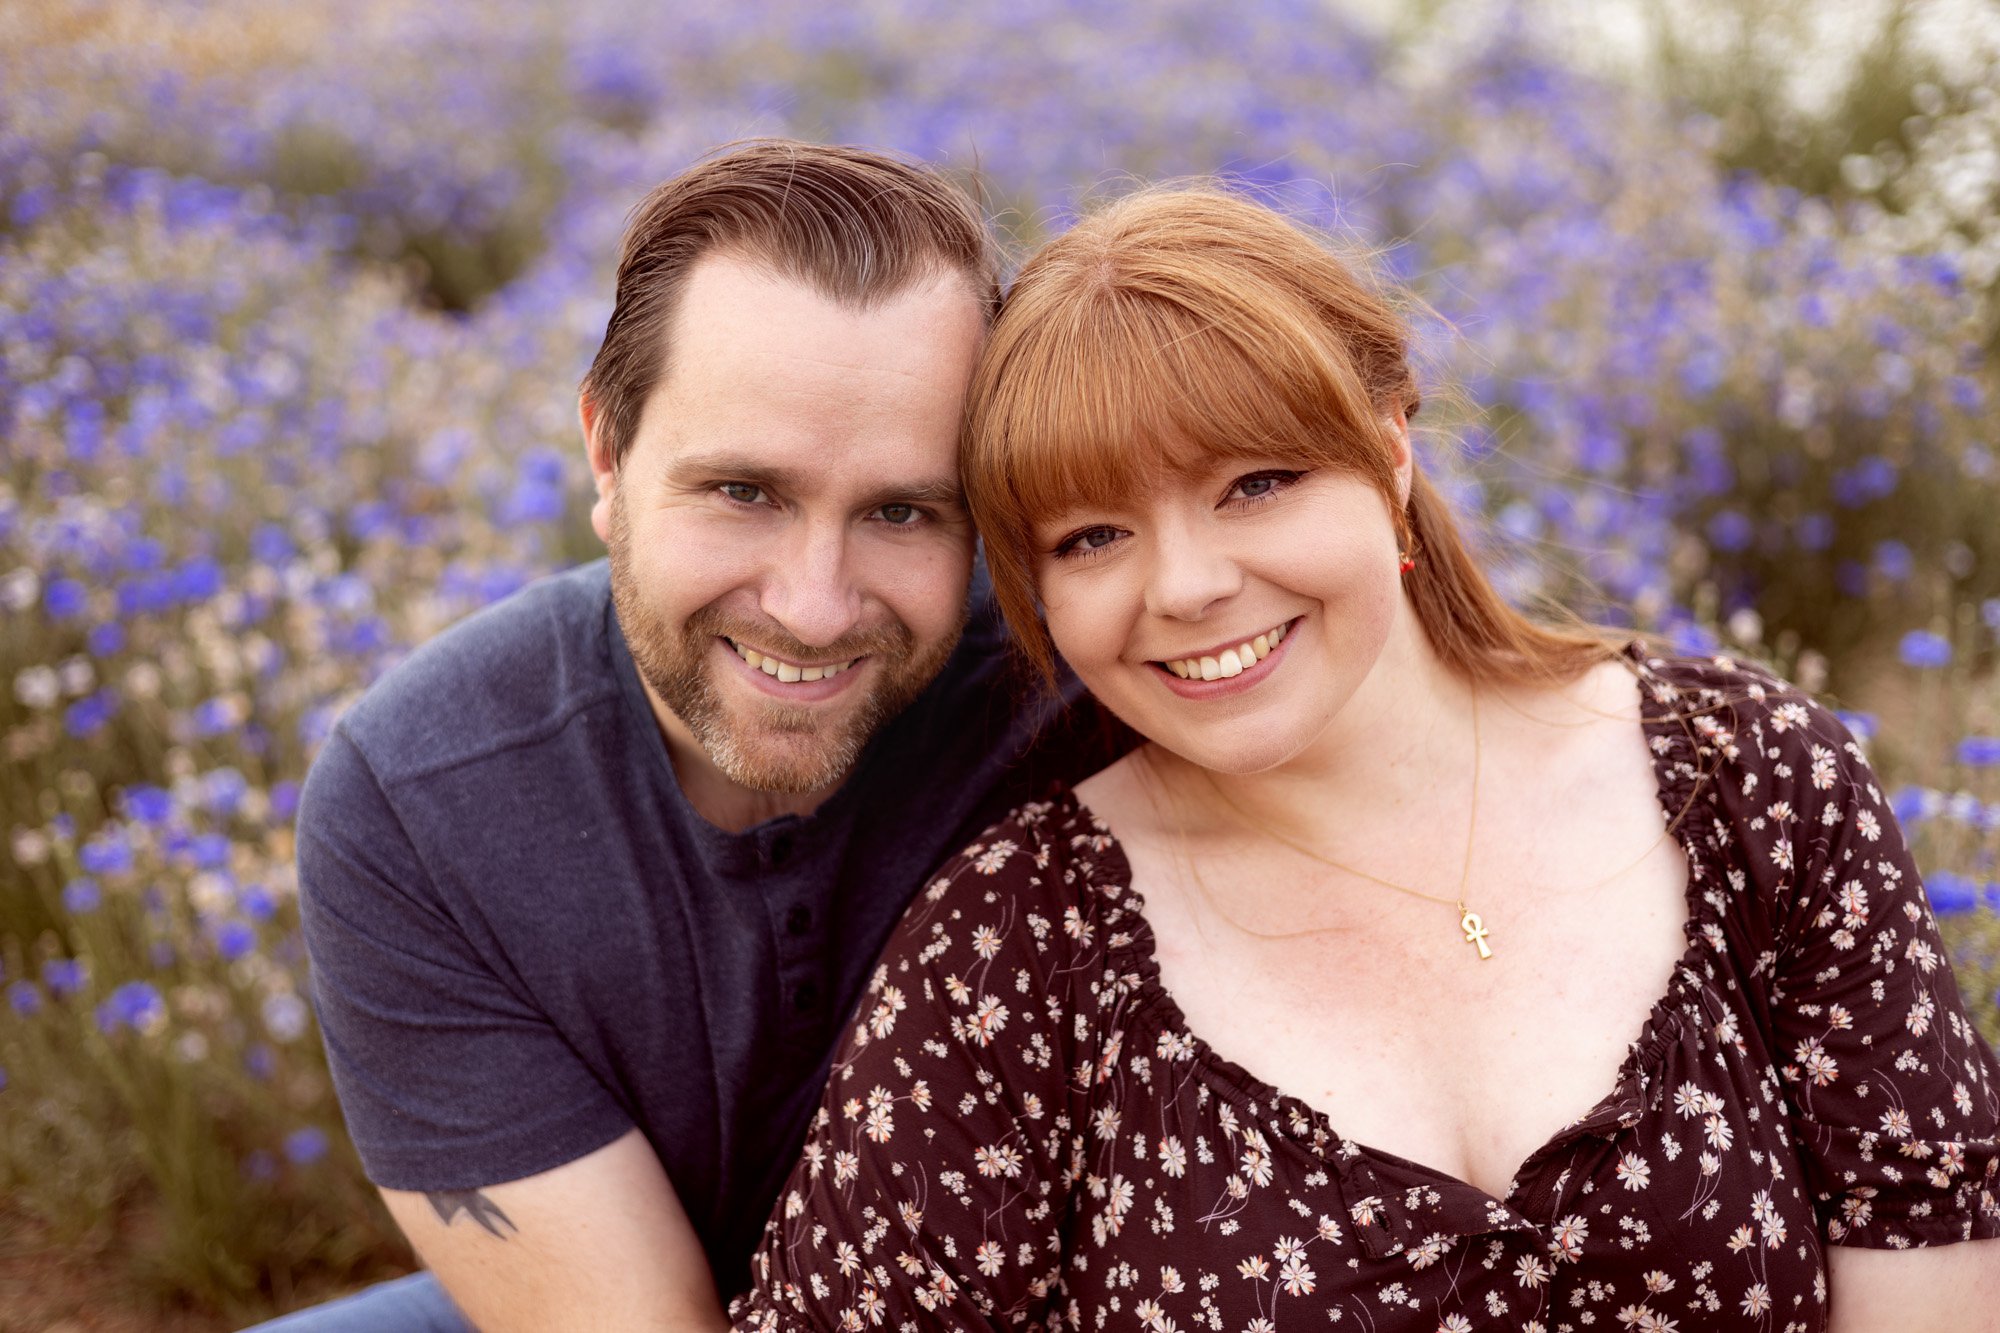      Couples, Portraits, Maternity or Family Sessions   Book Here  